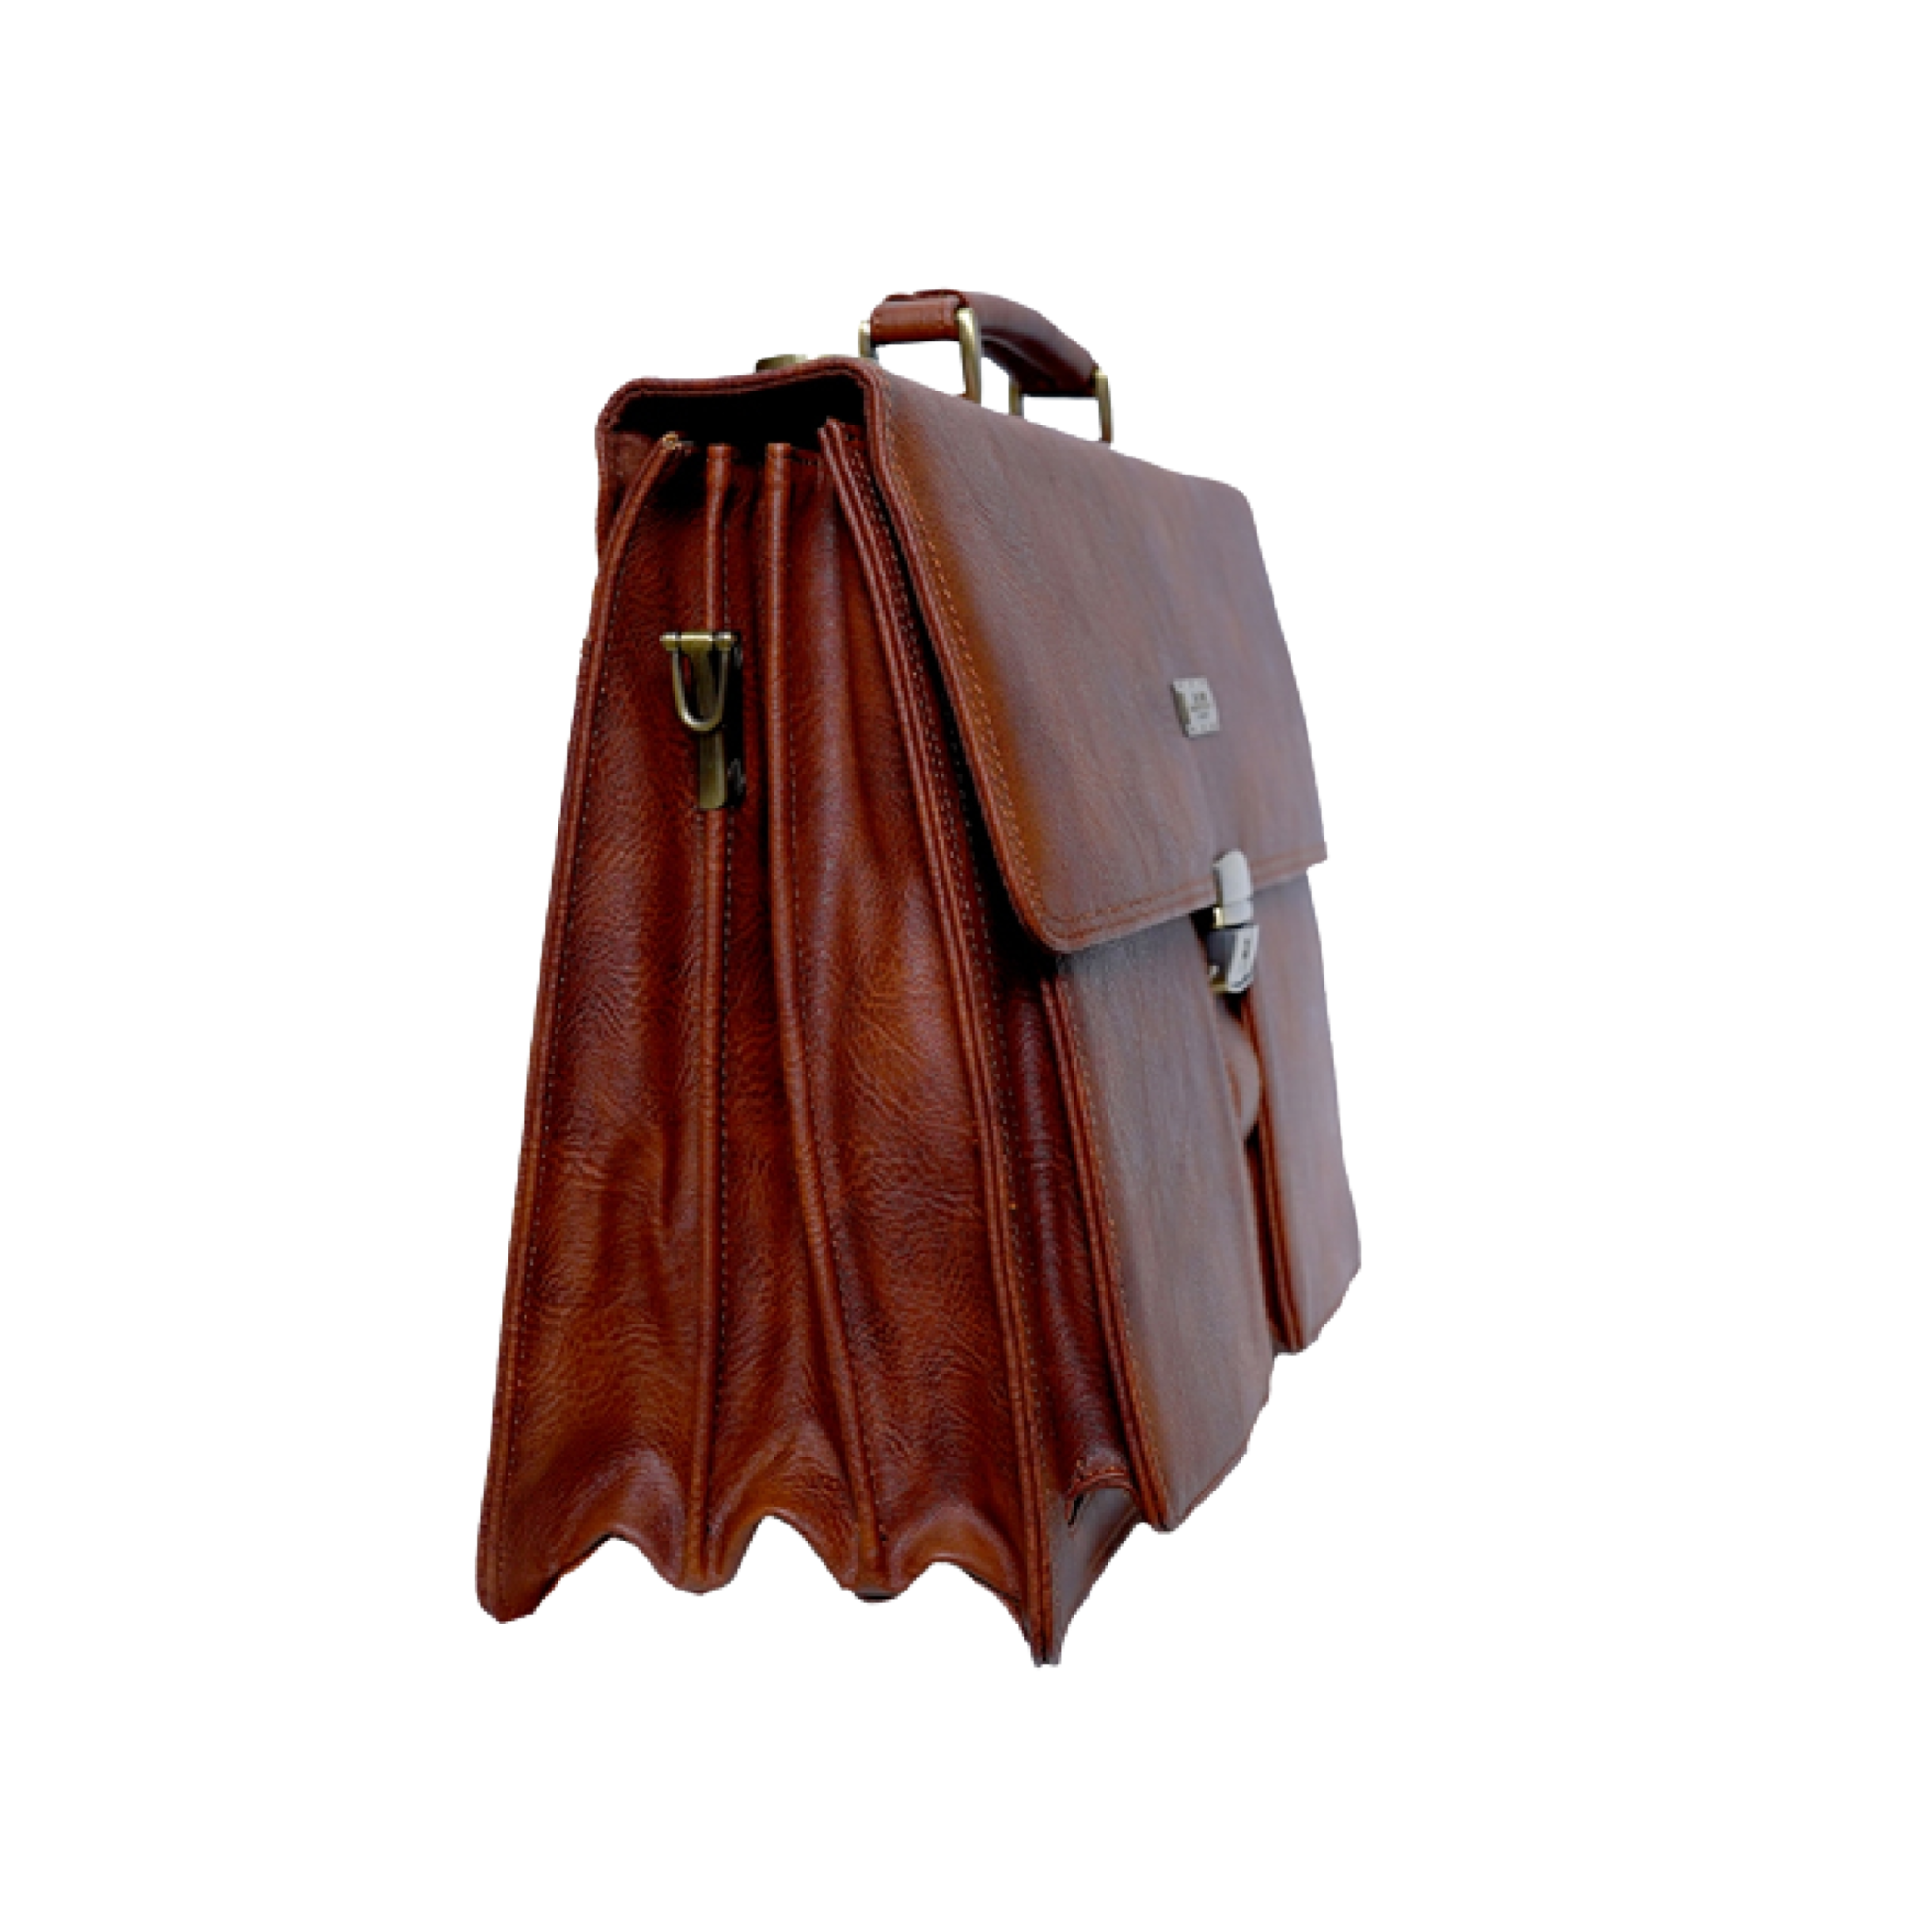 Business Bag, PU Leather Mustard Brown & Three Compartments Inside